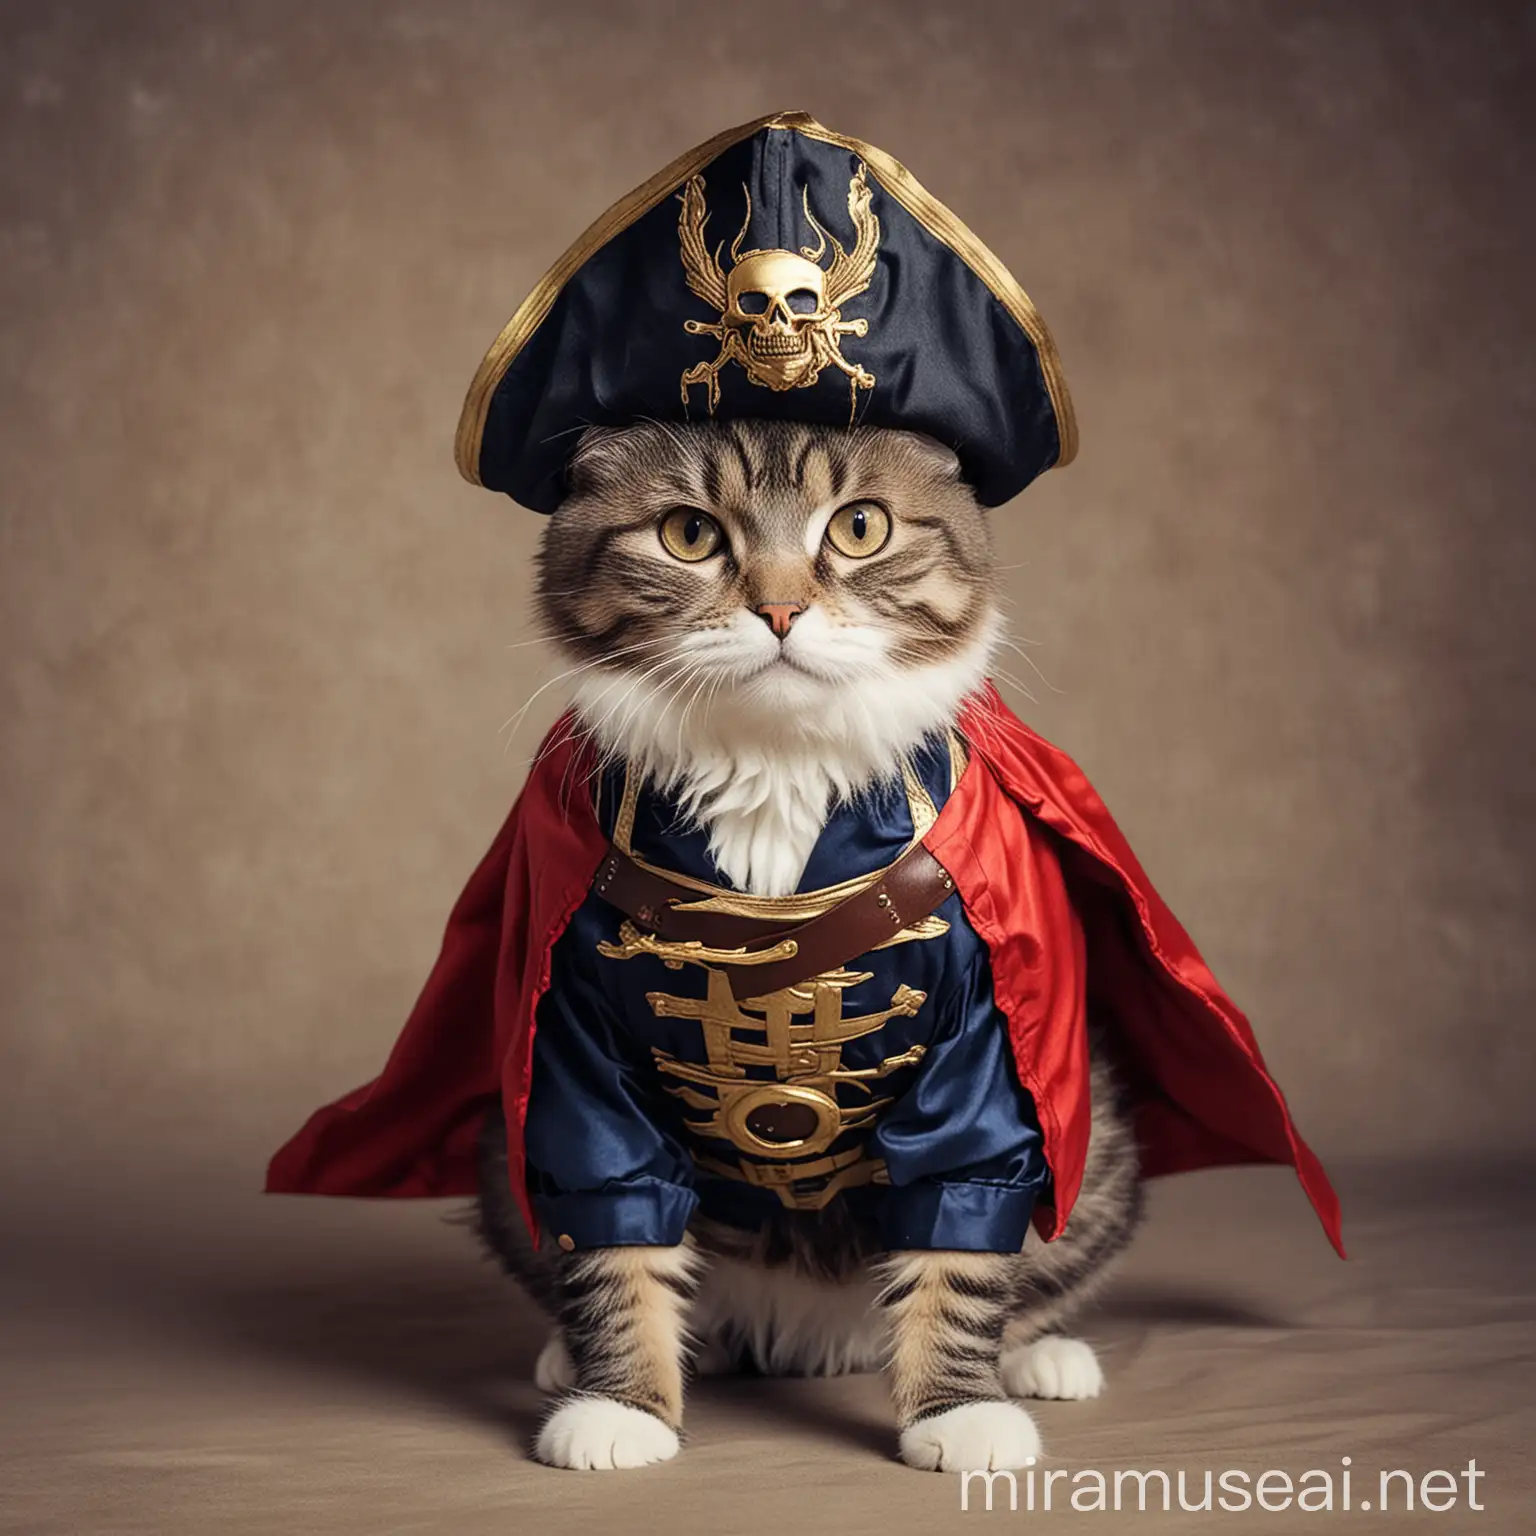 Dress up your cat in fun costumes like superheroes, pirates, or historical figures for some unique and entertaining photos.